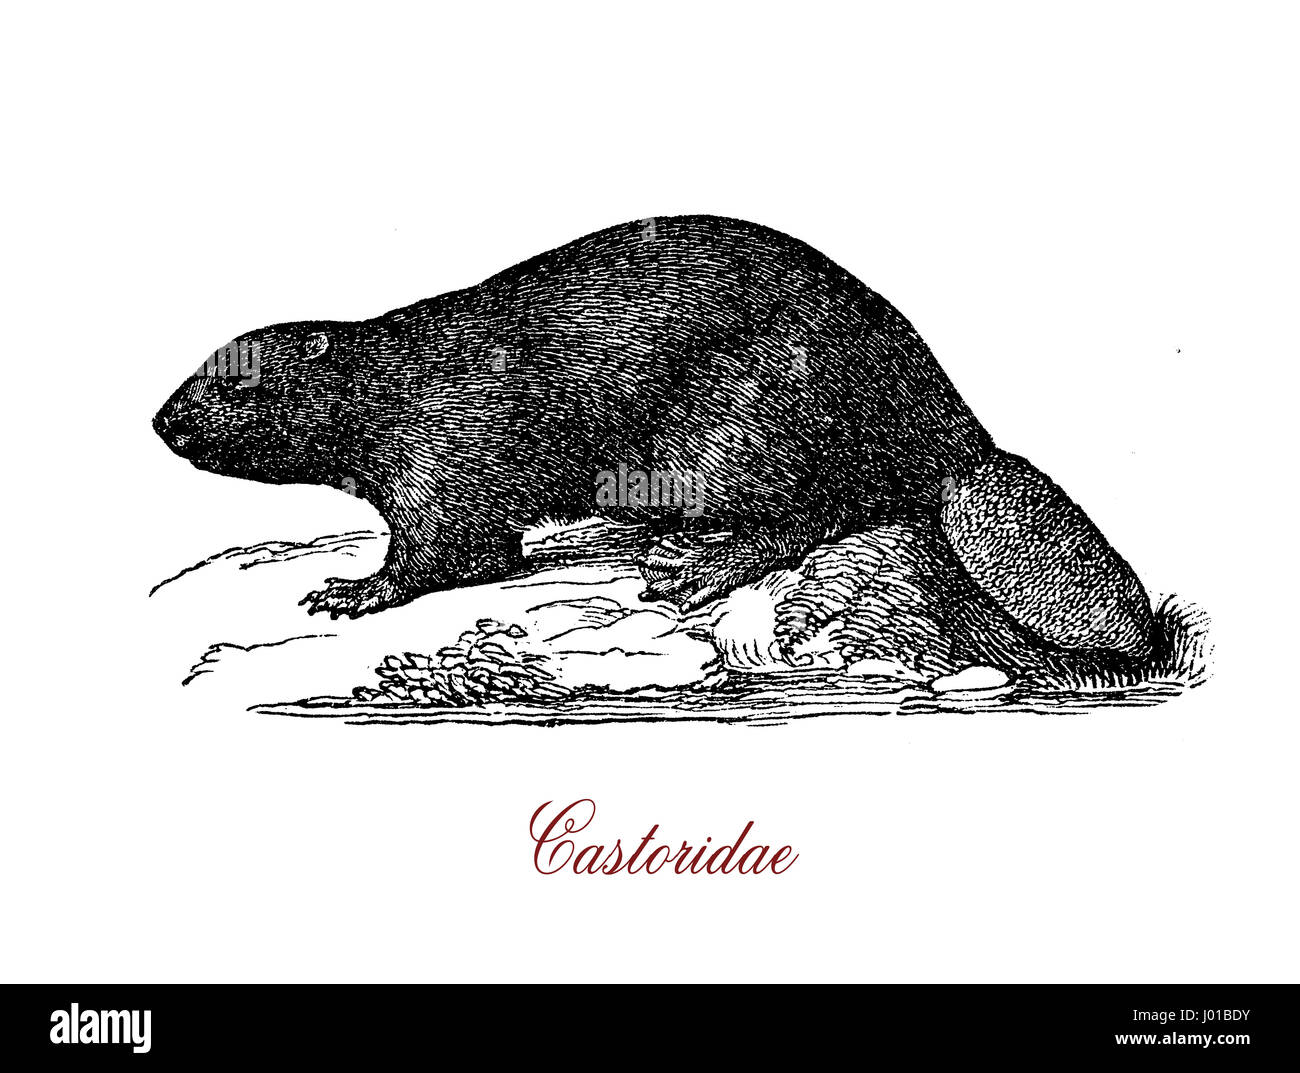 Castorids (beavers) are medium-sized mammals,  semiaquatic, with sleek bodies and webbed hind feet, and are more agile in the water than on land. Their tails are flattened and scaly, adaptations that help them manoeuvre in the water. Stock Photo